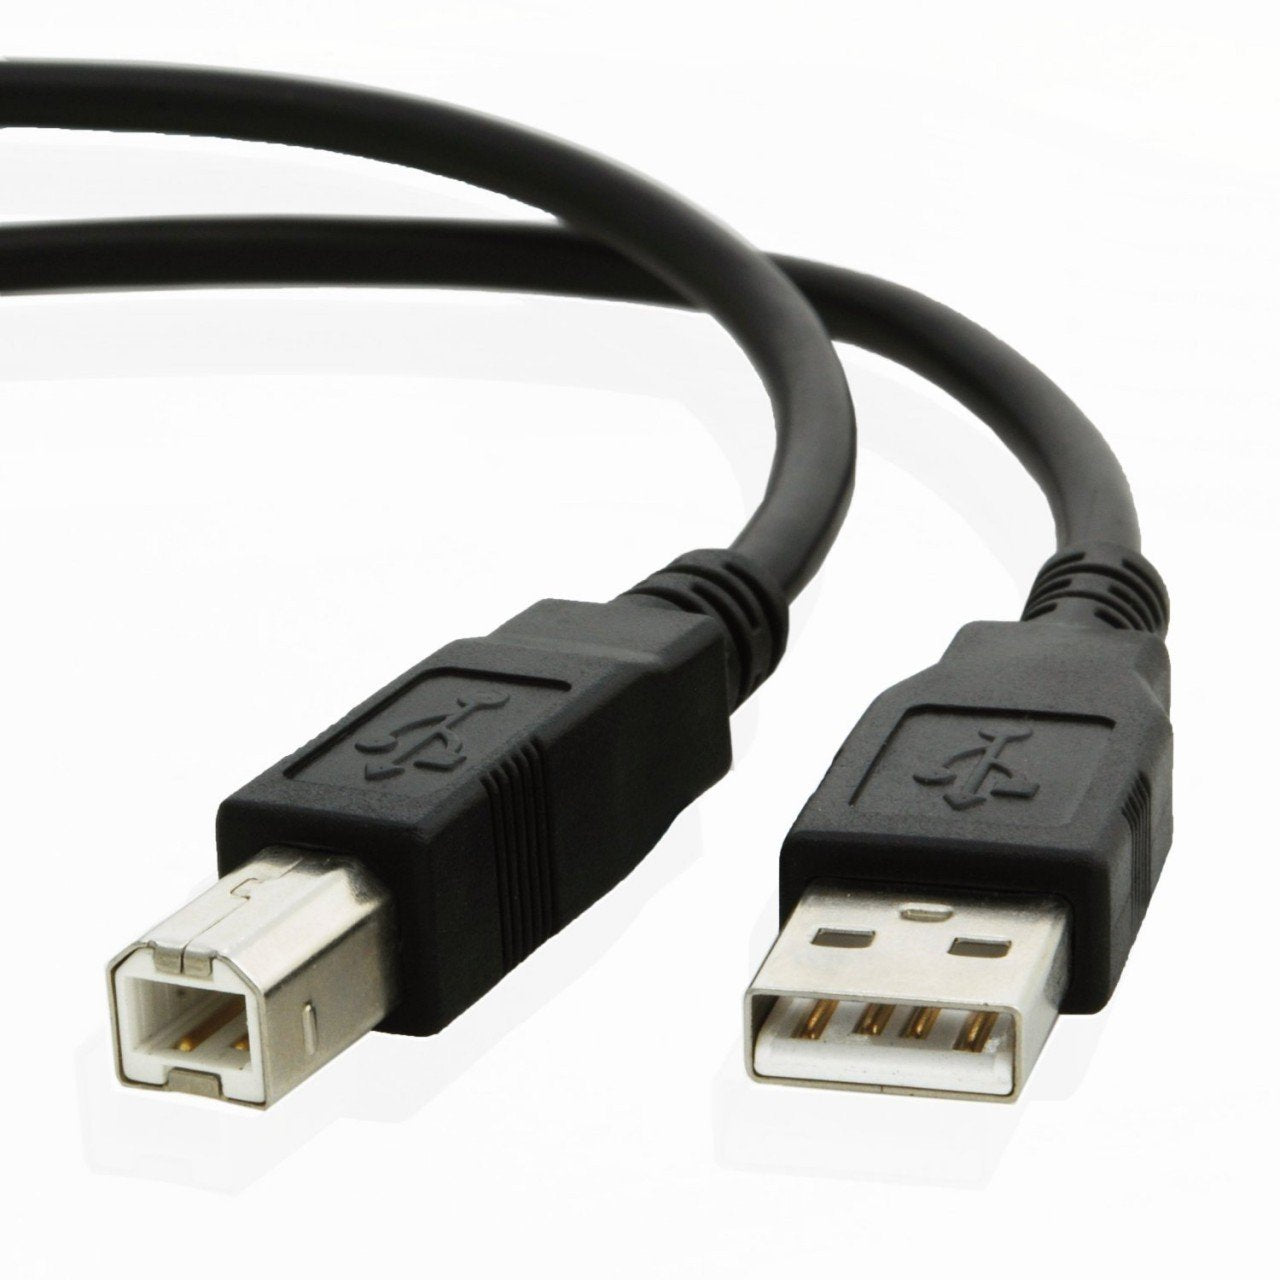 USB cable for Epson WORKFORCE PRO WF-4730